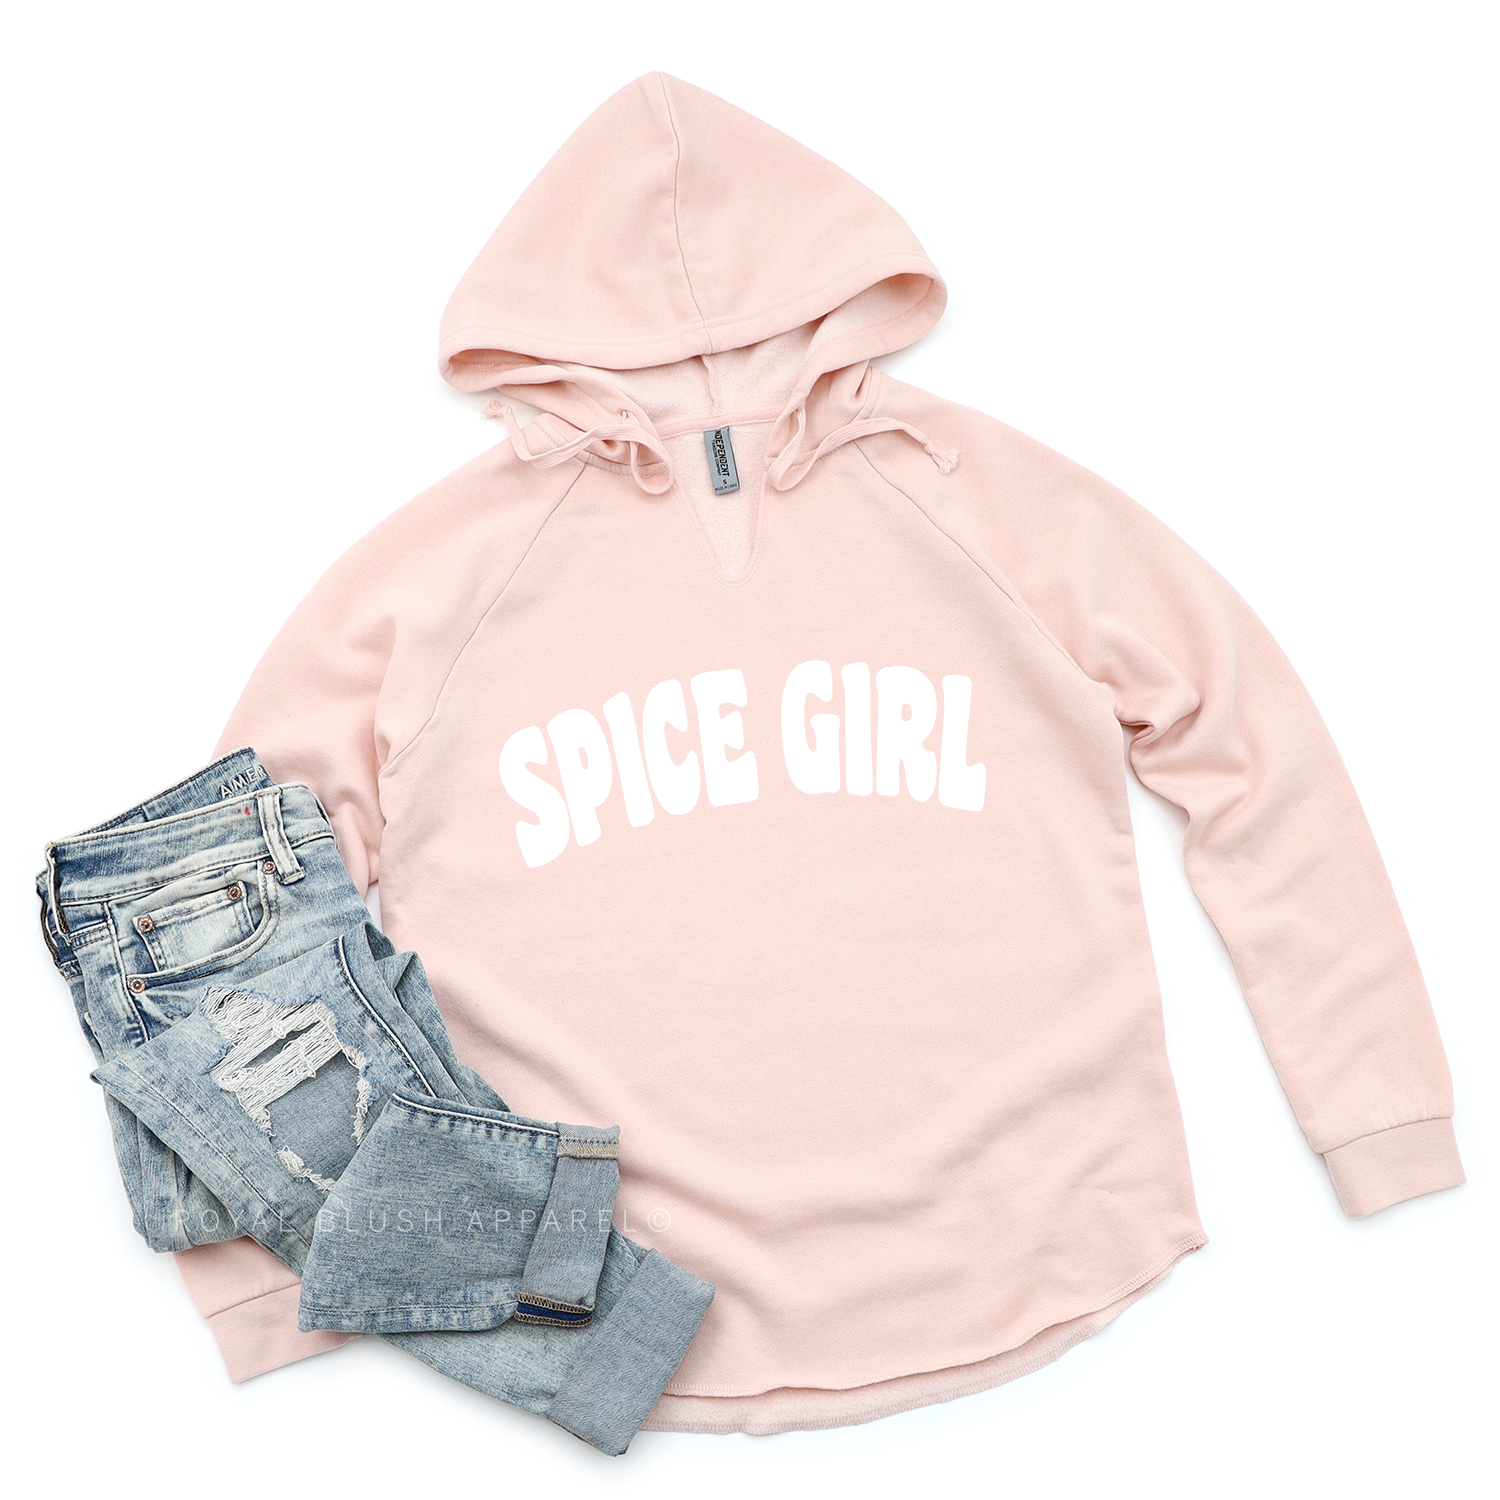 Spice Girl Independent Hoodie